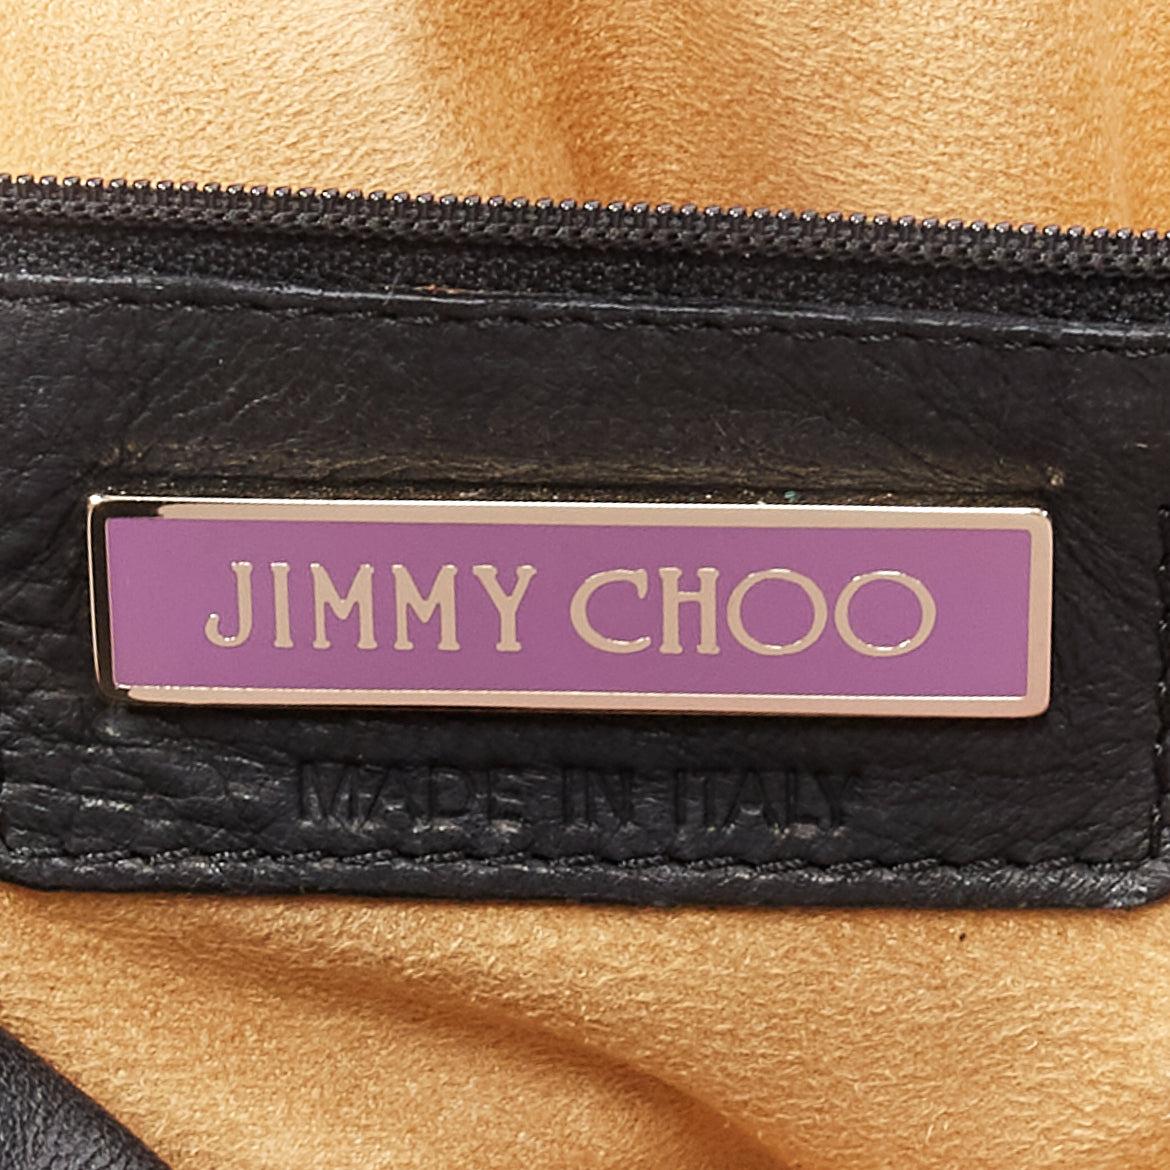 JIMMY CHOO black soft leather gold chain logo zip oversized clutch bag For Sale 6